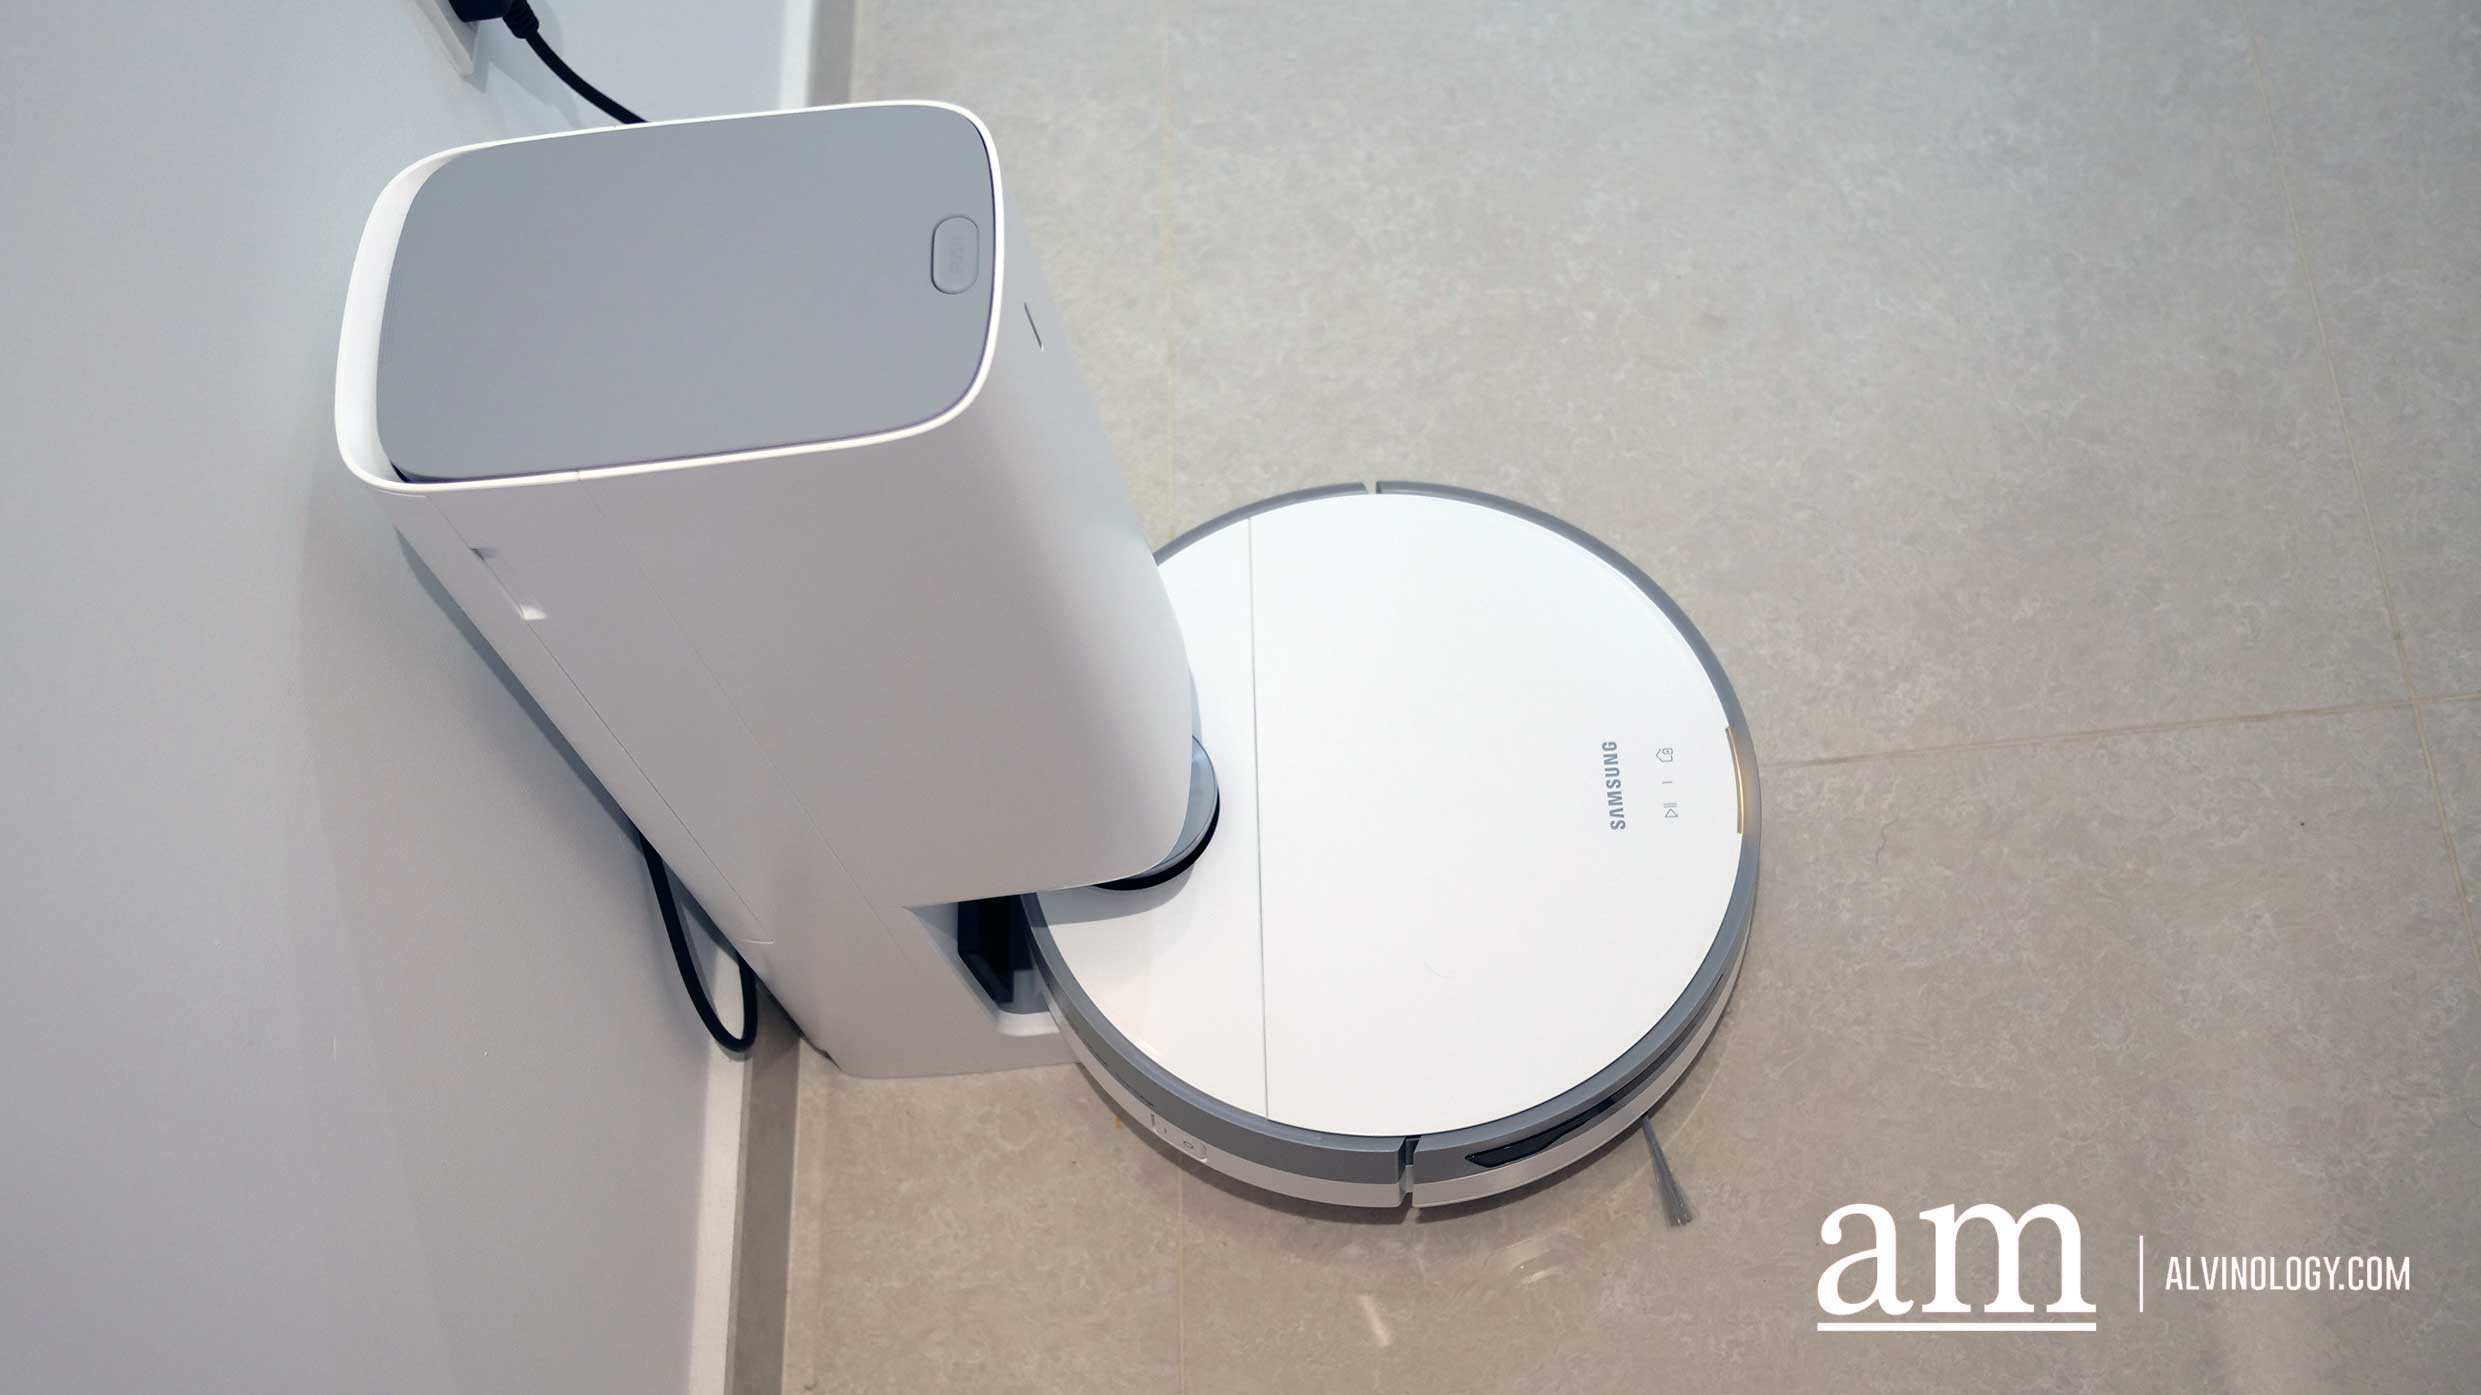 [Review] Smart robot vacuum that empties its own bin: Samsung Jet Bot+ with Clean Station™  - Alvinology